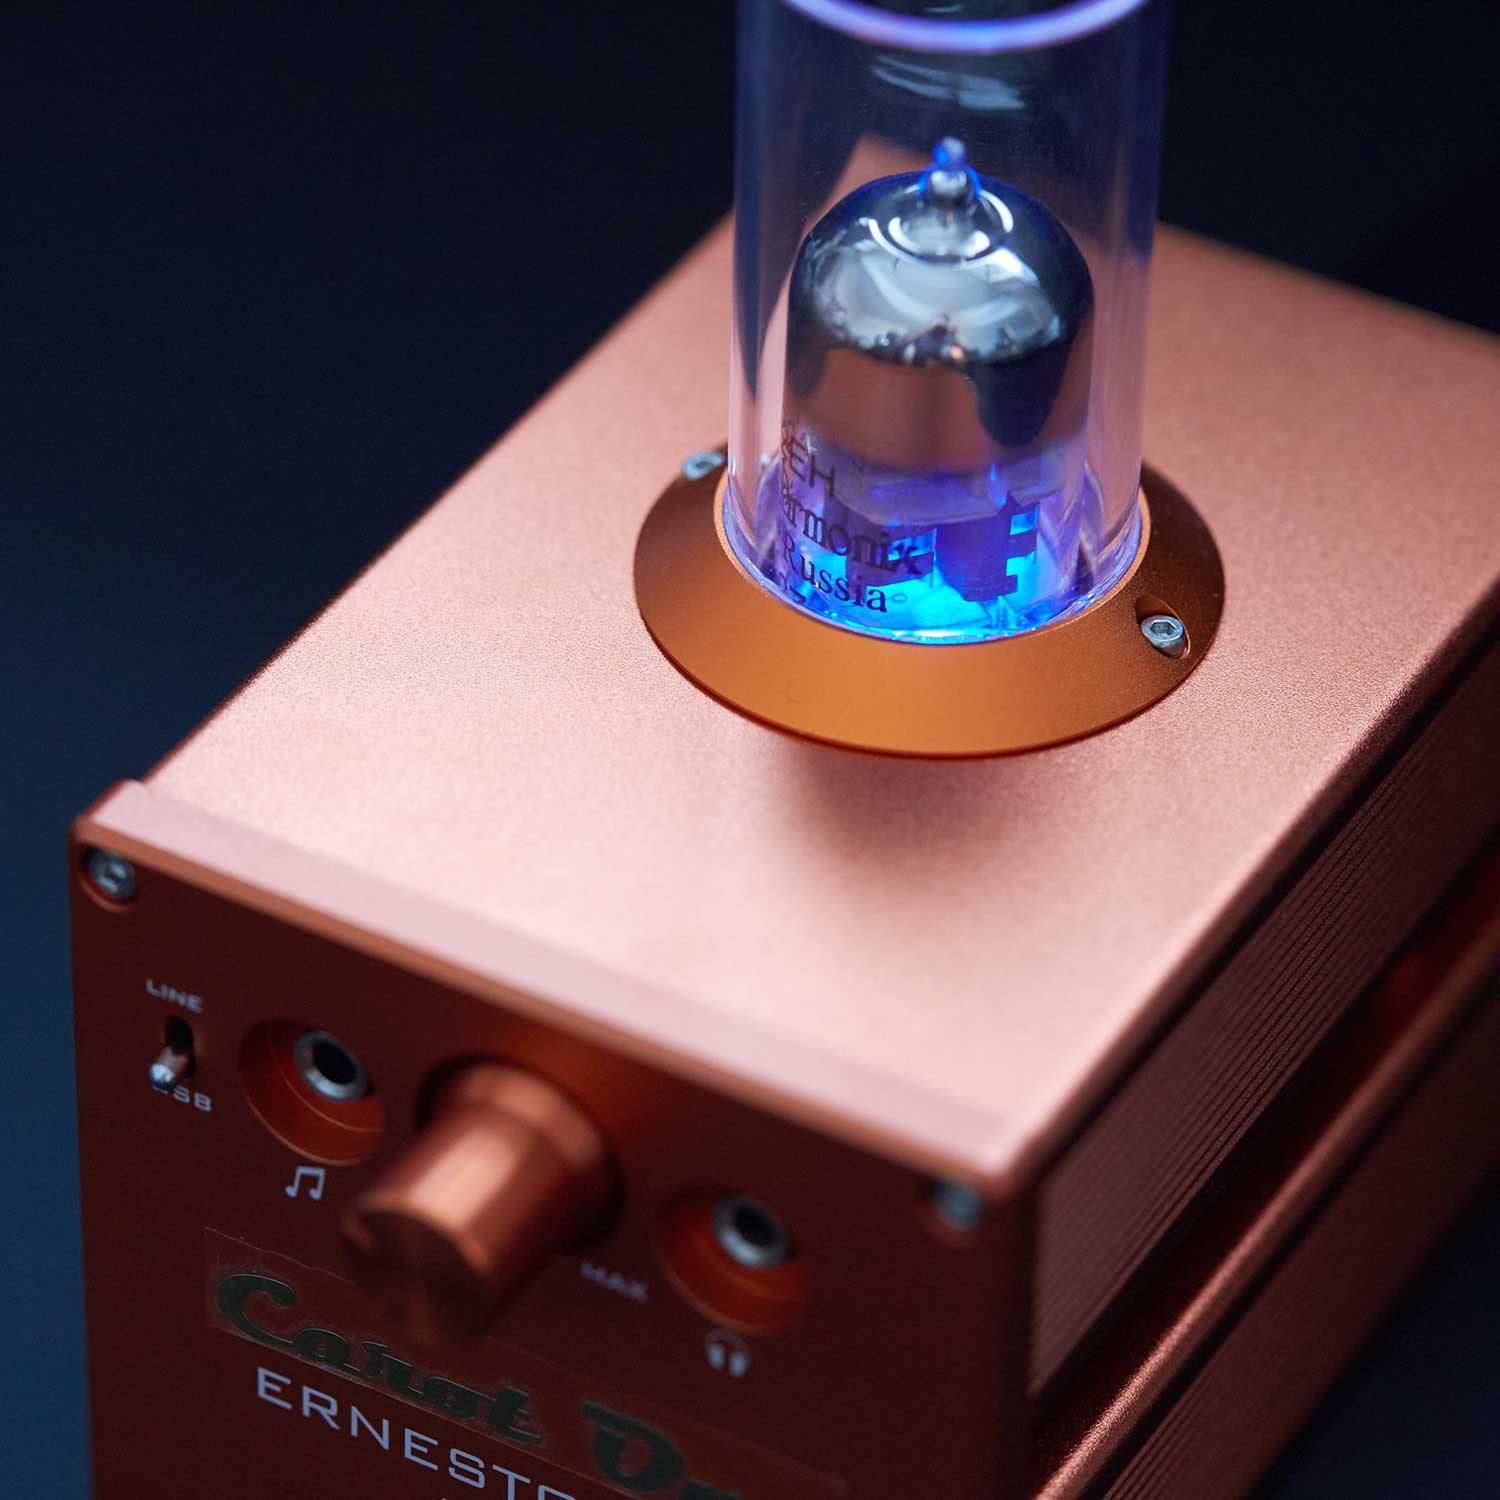 Carot One - Ernestolone tube amplifier with DAC for headphones and speakers